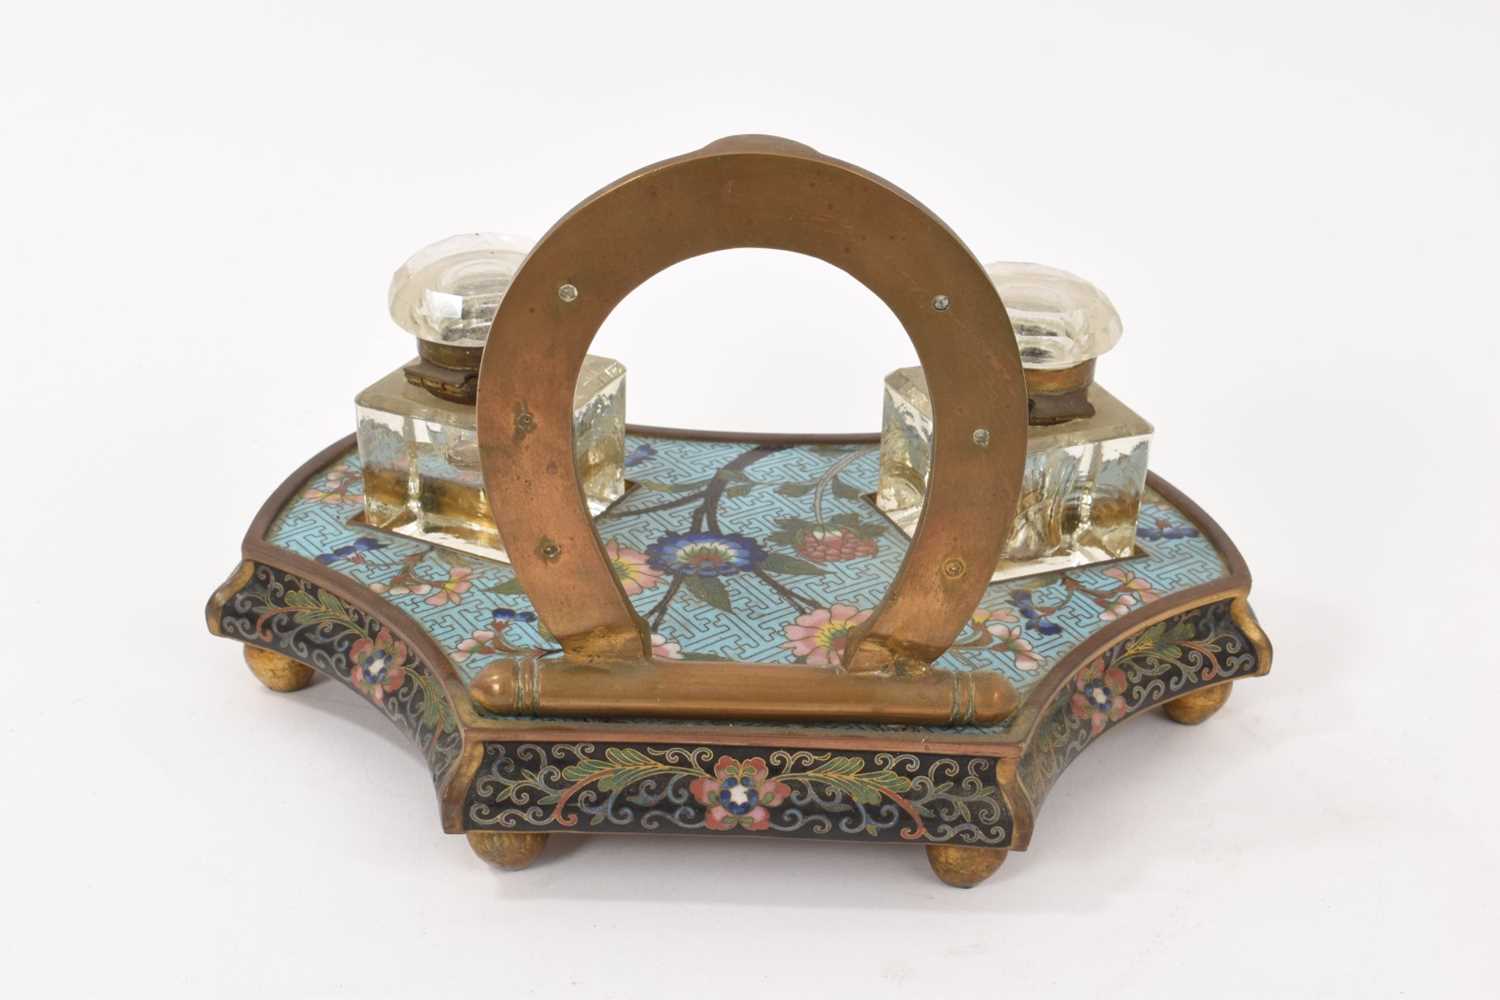 Late 19th century Japanese cloisonné enamel inkstand - Image 3 of 3